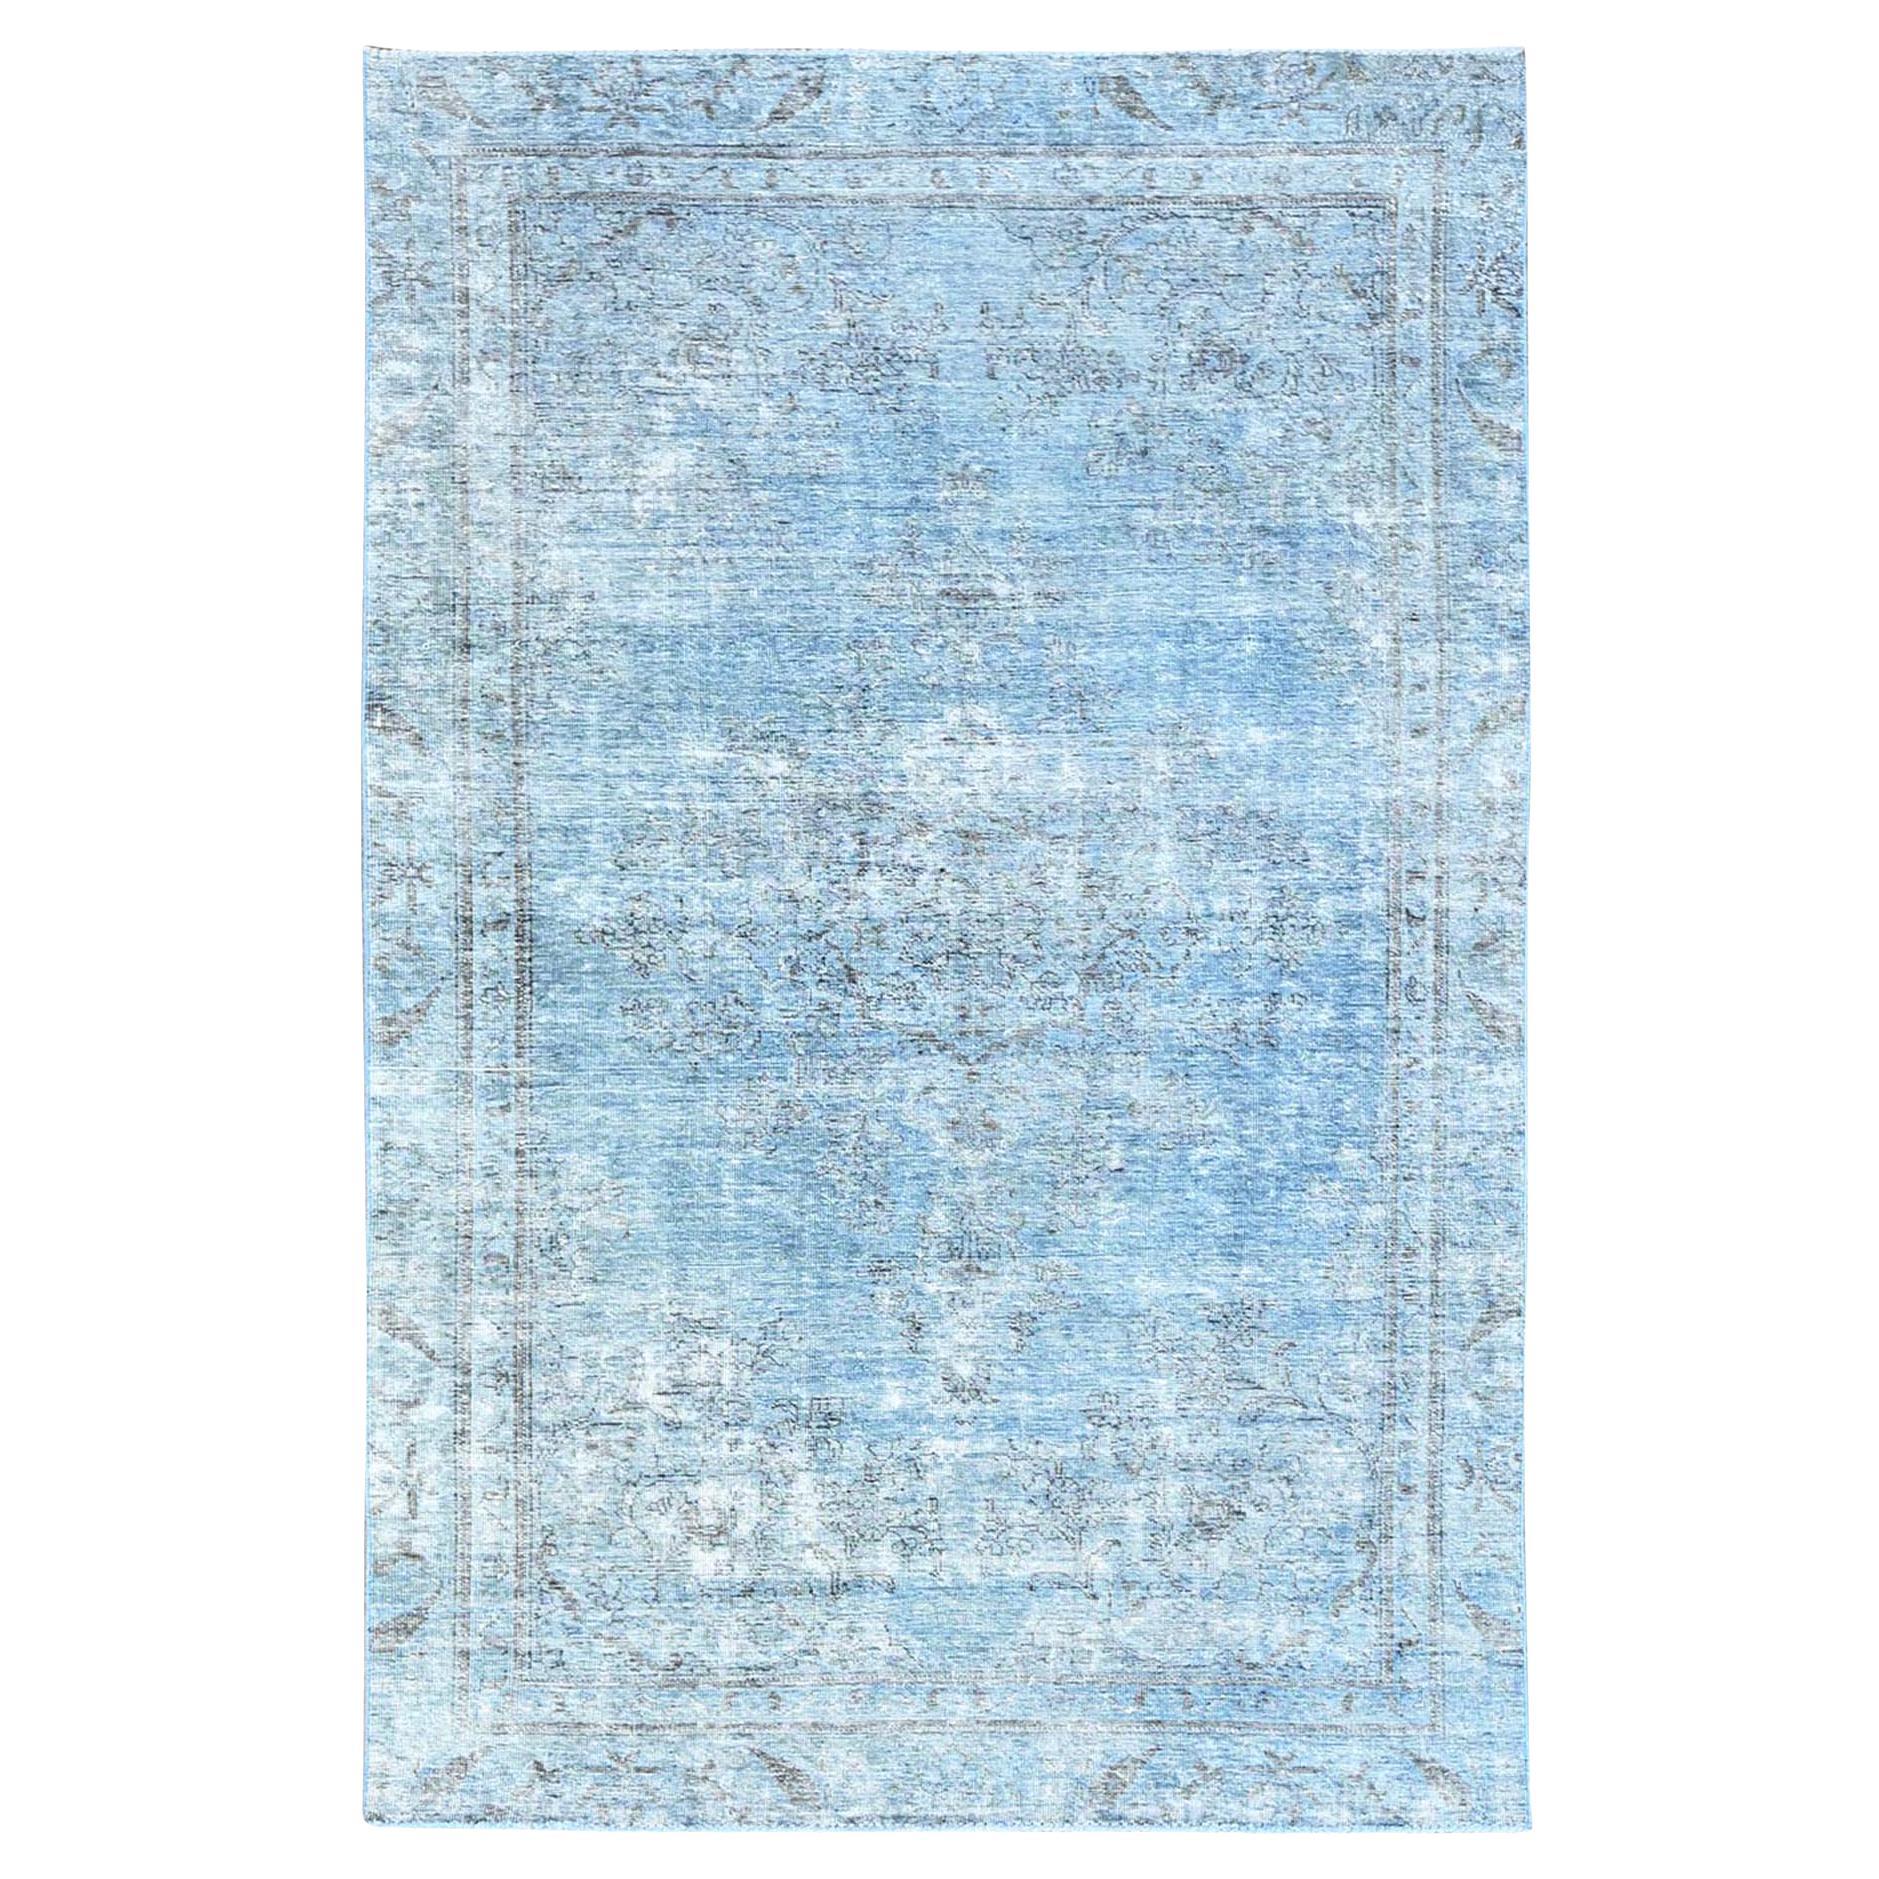 Blue Vintage Persian Tabriz Distressed Look Overdyed Worn Wool Hand Knotted Rug